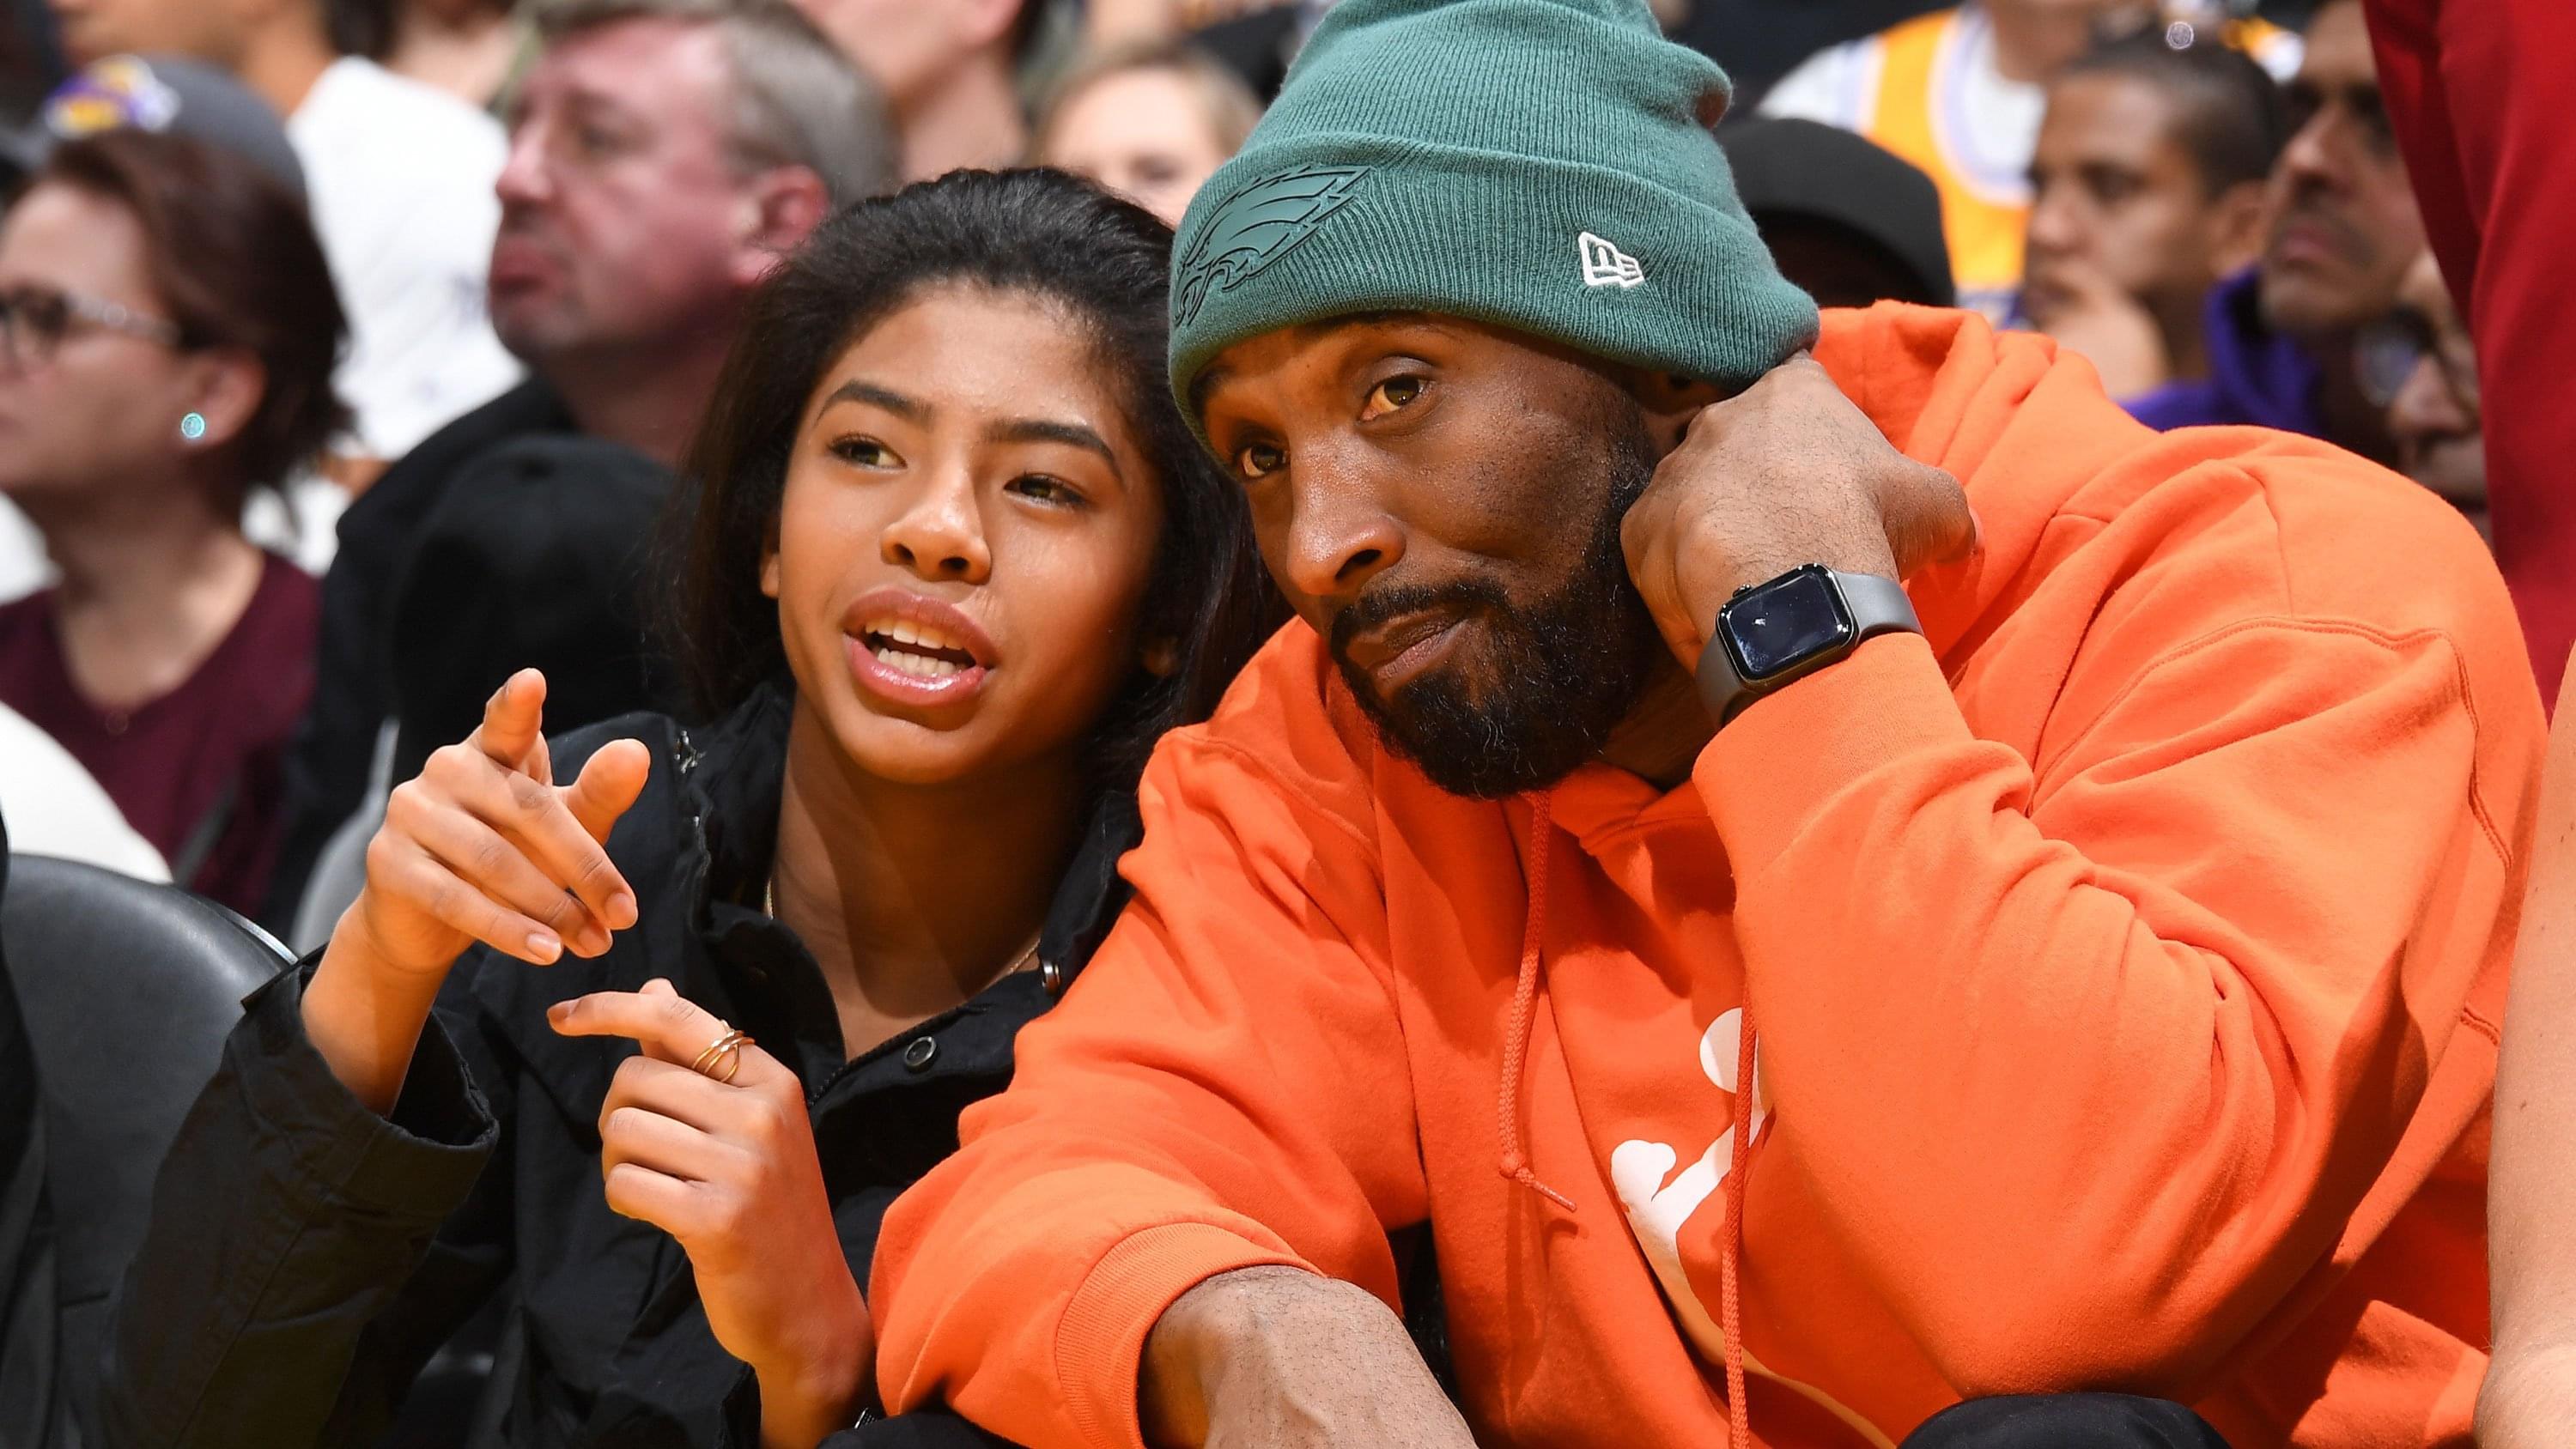 Kobe Bryant and his daughter, Gianna, killed in a helicopter crash in California